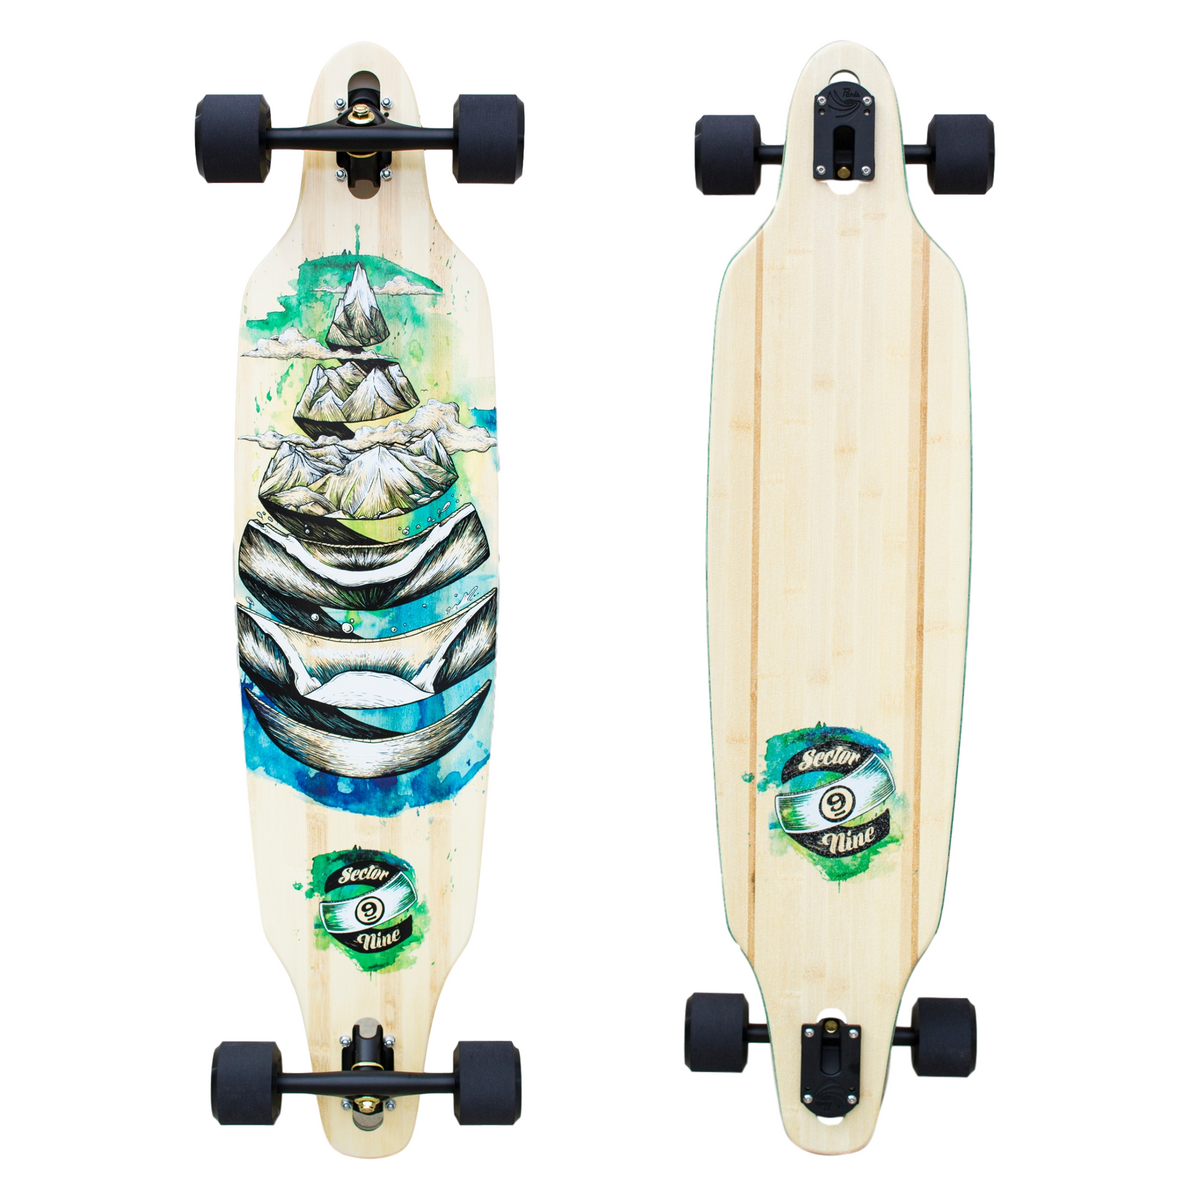 Sector 9 Nine Droplet Lookout Longboard Skateboard with Paris Trucks and Fireball Beast Wheels Product